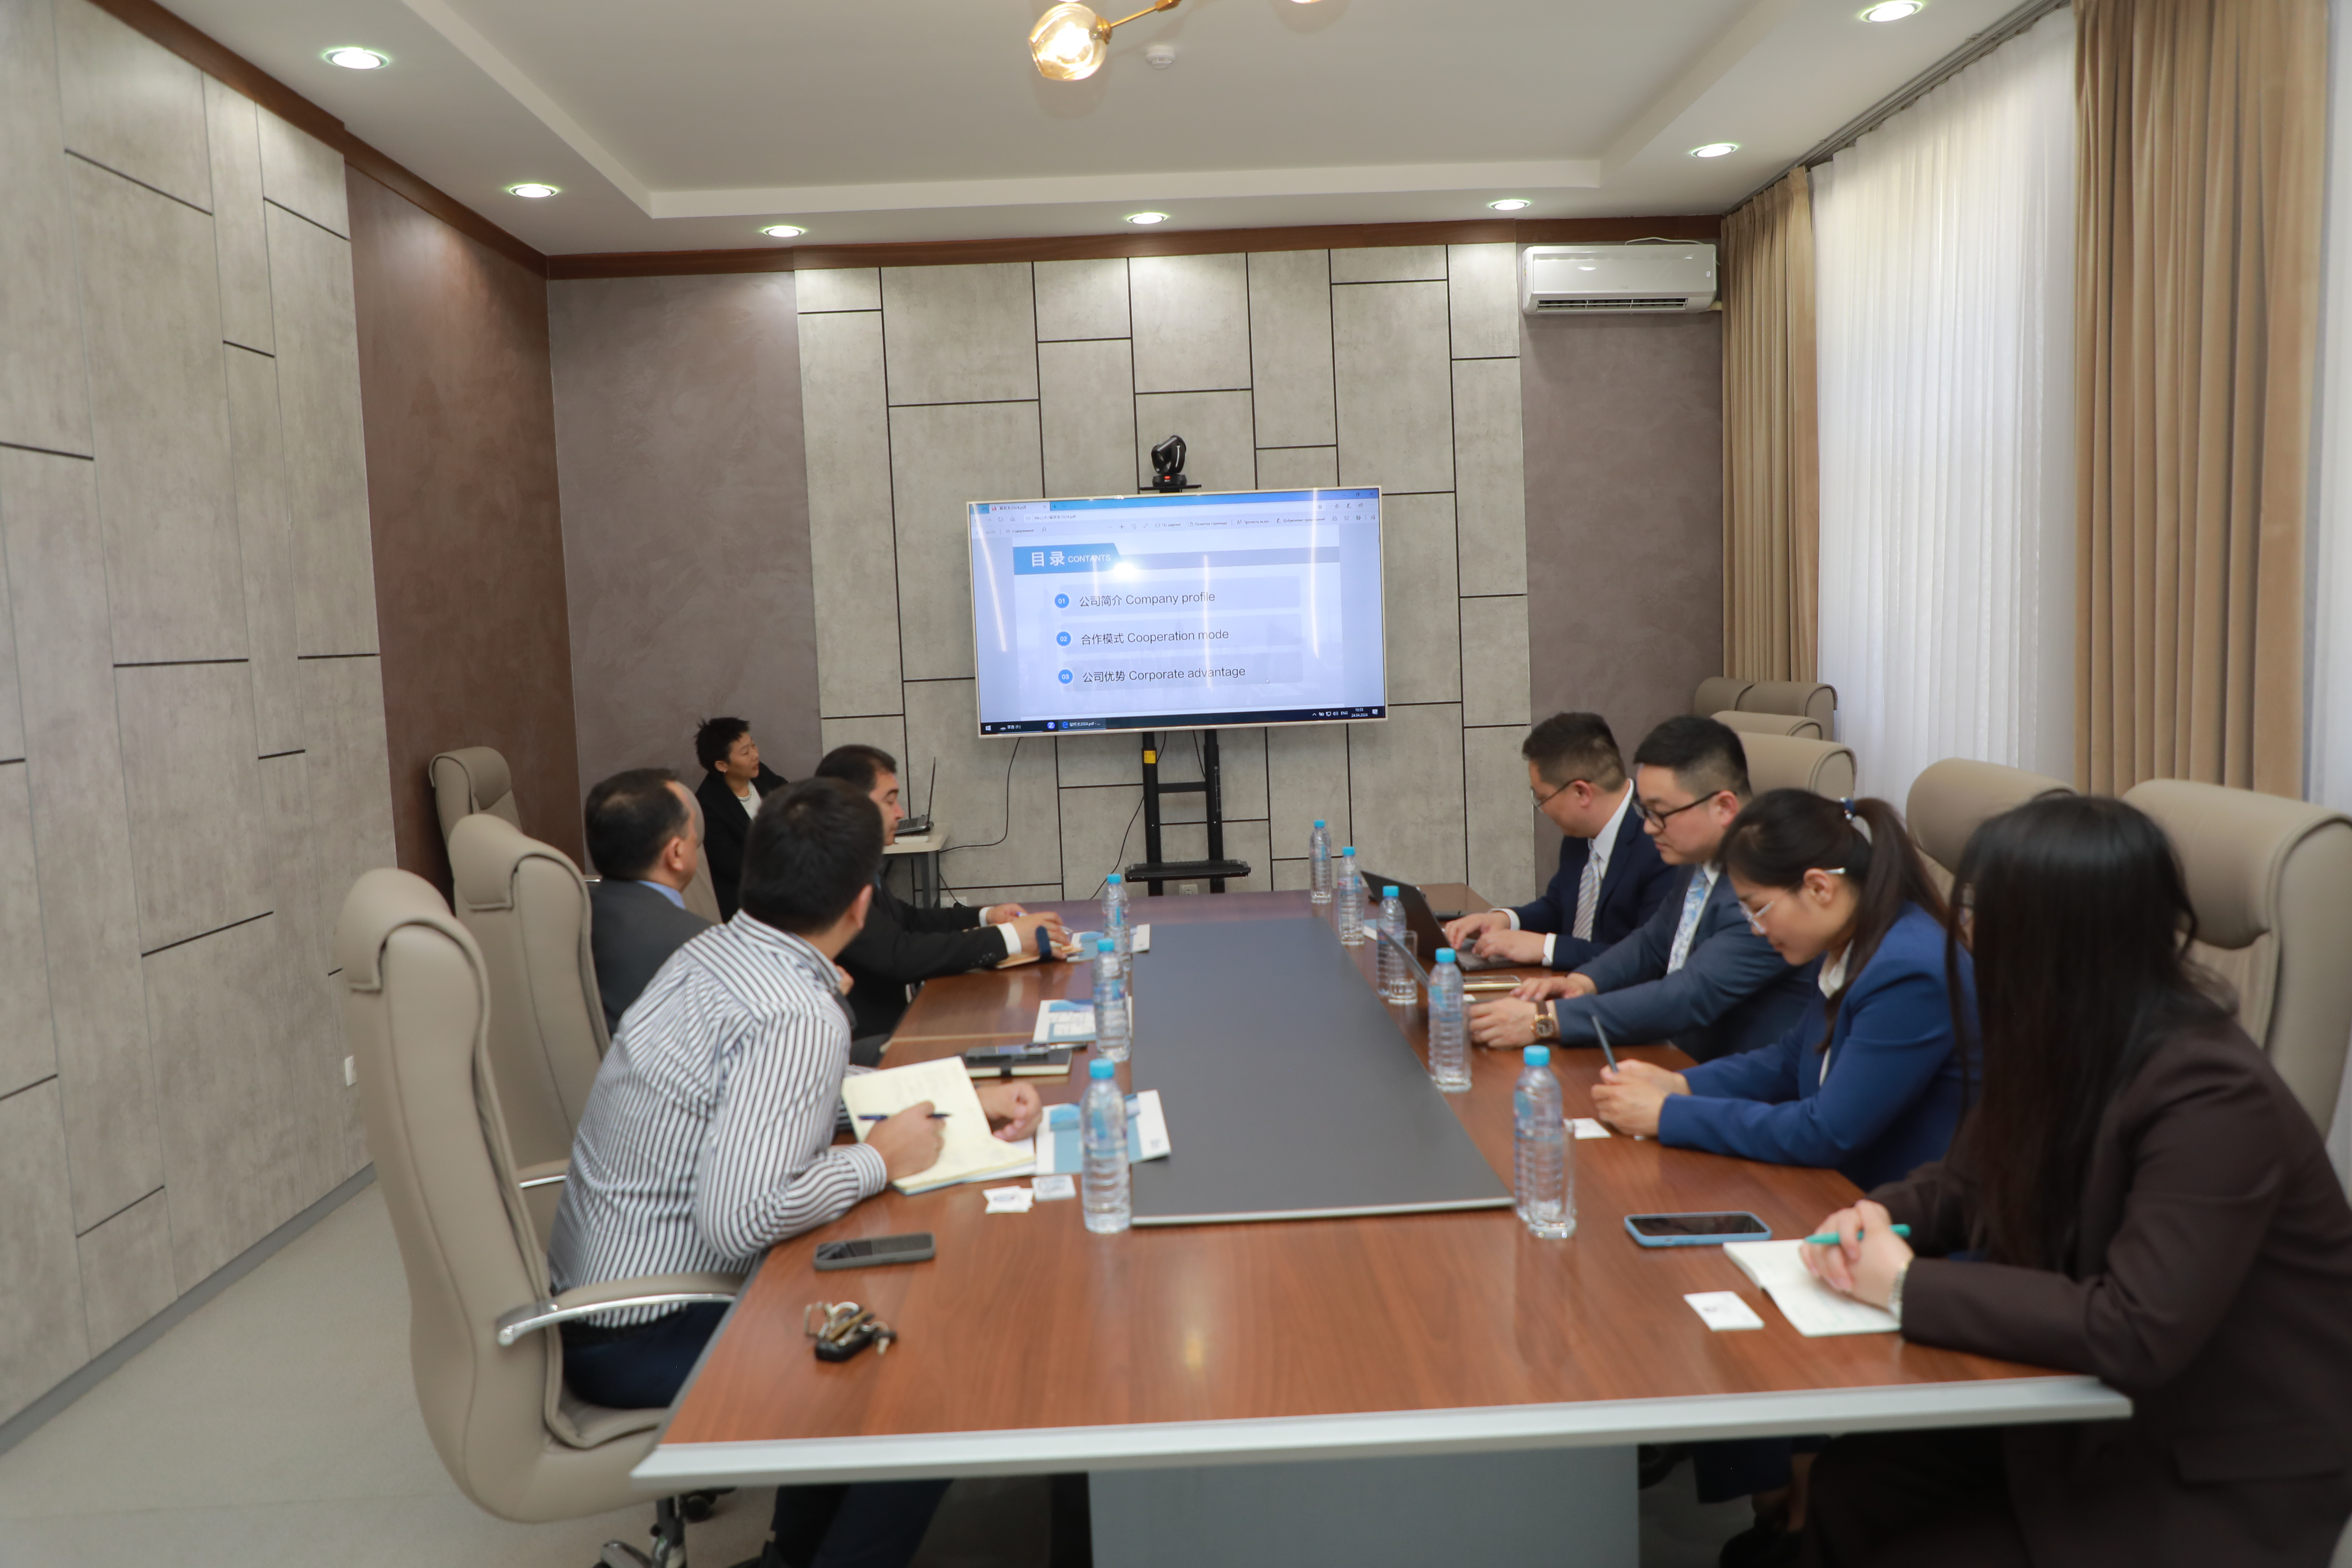 The University of World Economy and Diplomacy hosted a meeting with a delegation from Meng Zhi Yan (Beijing) Technology Co., LTD